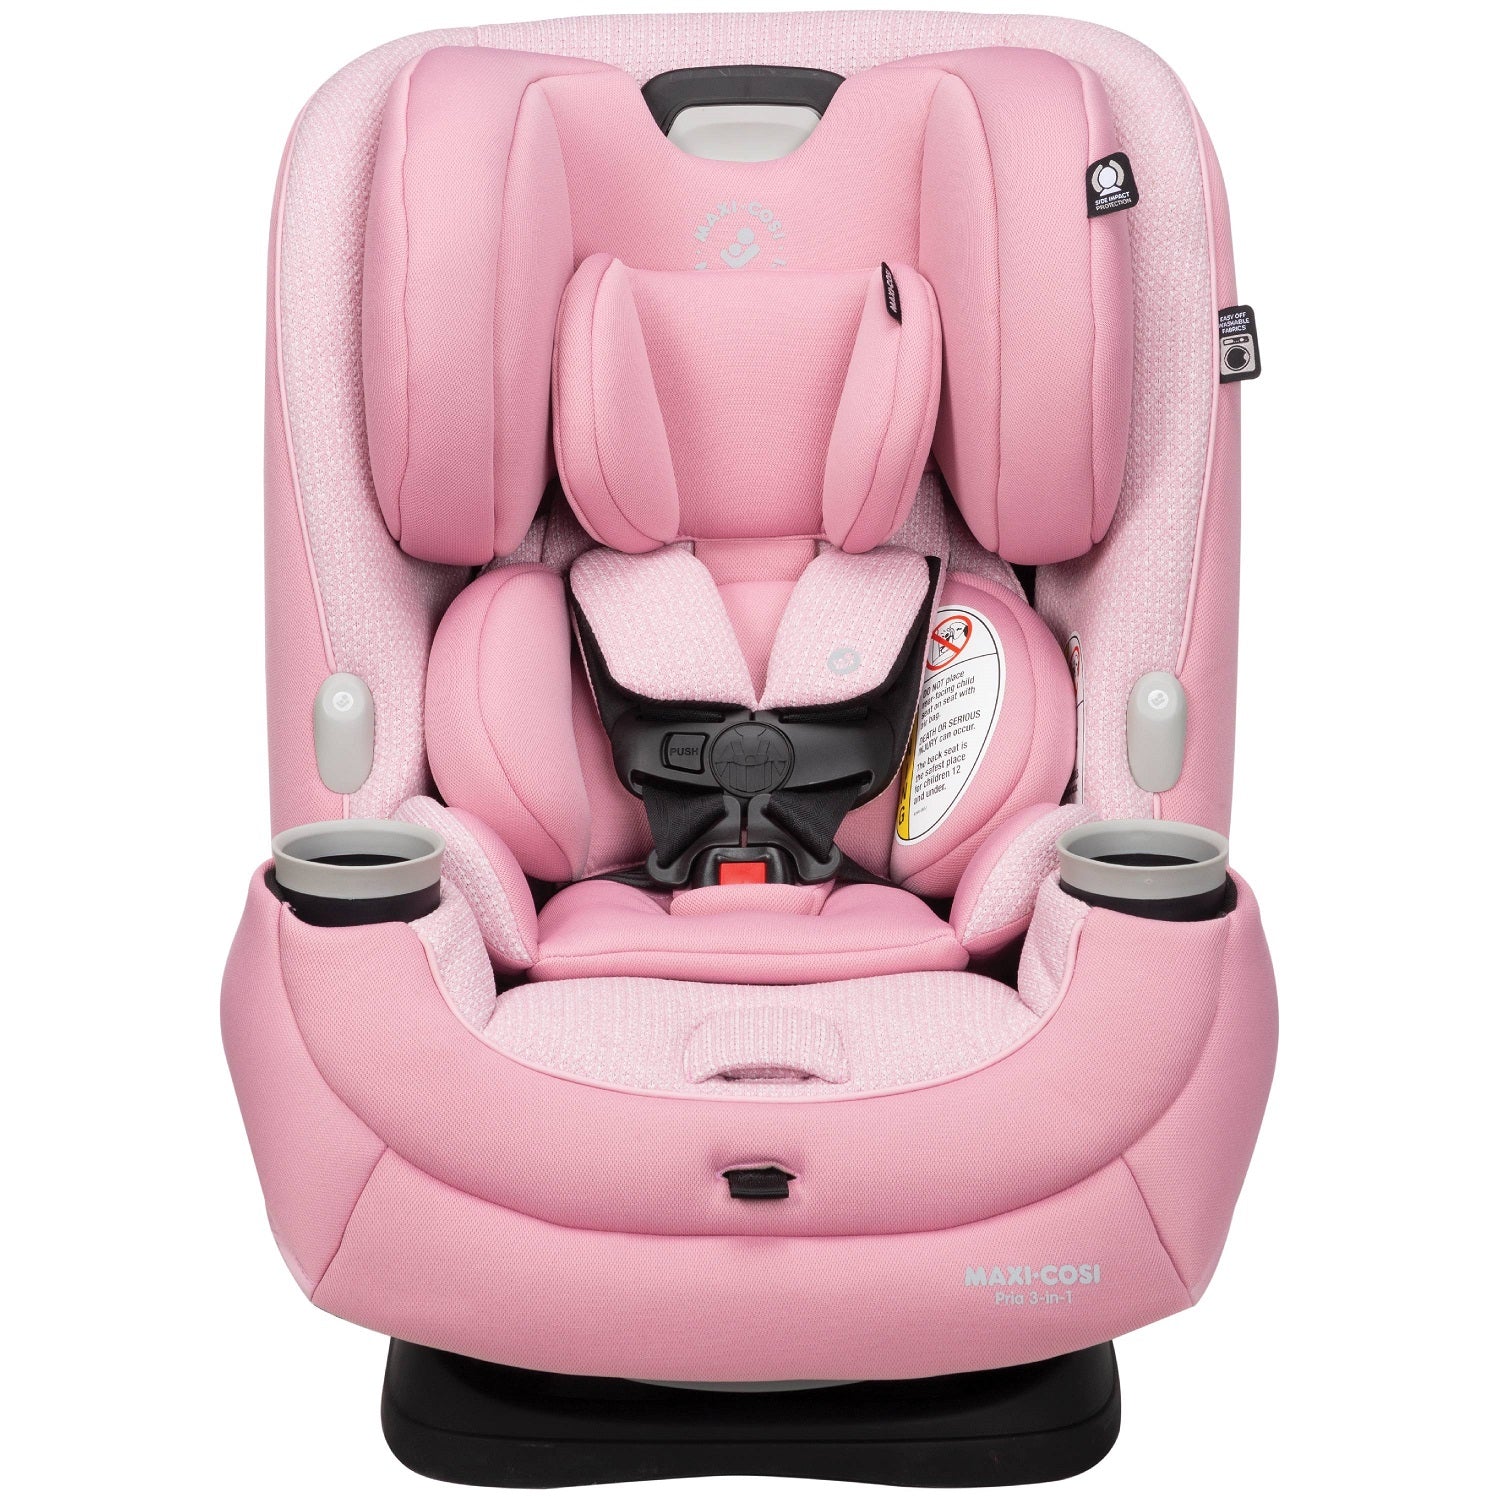 Maxi-Cosi Pria All-in-One Convertible Car Seat, All-in-One Seating System:  Rear-Facing, from 4-40 pounds; Forward-Facing to 65 pounds; and up to 100